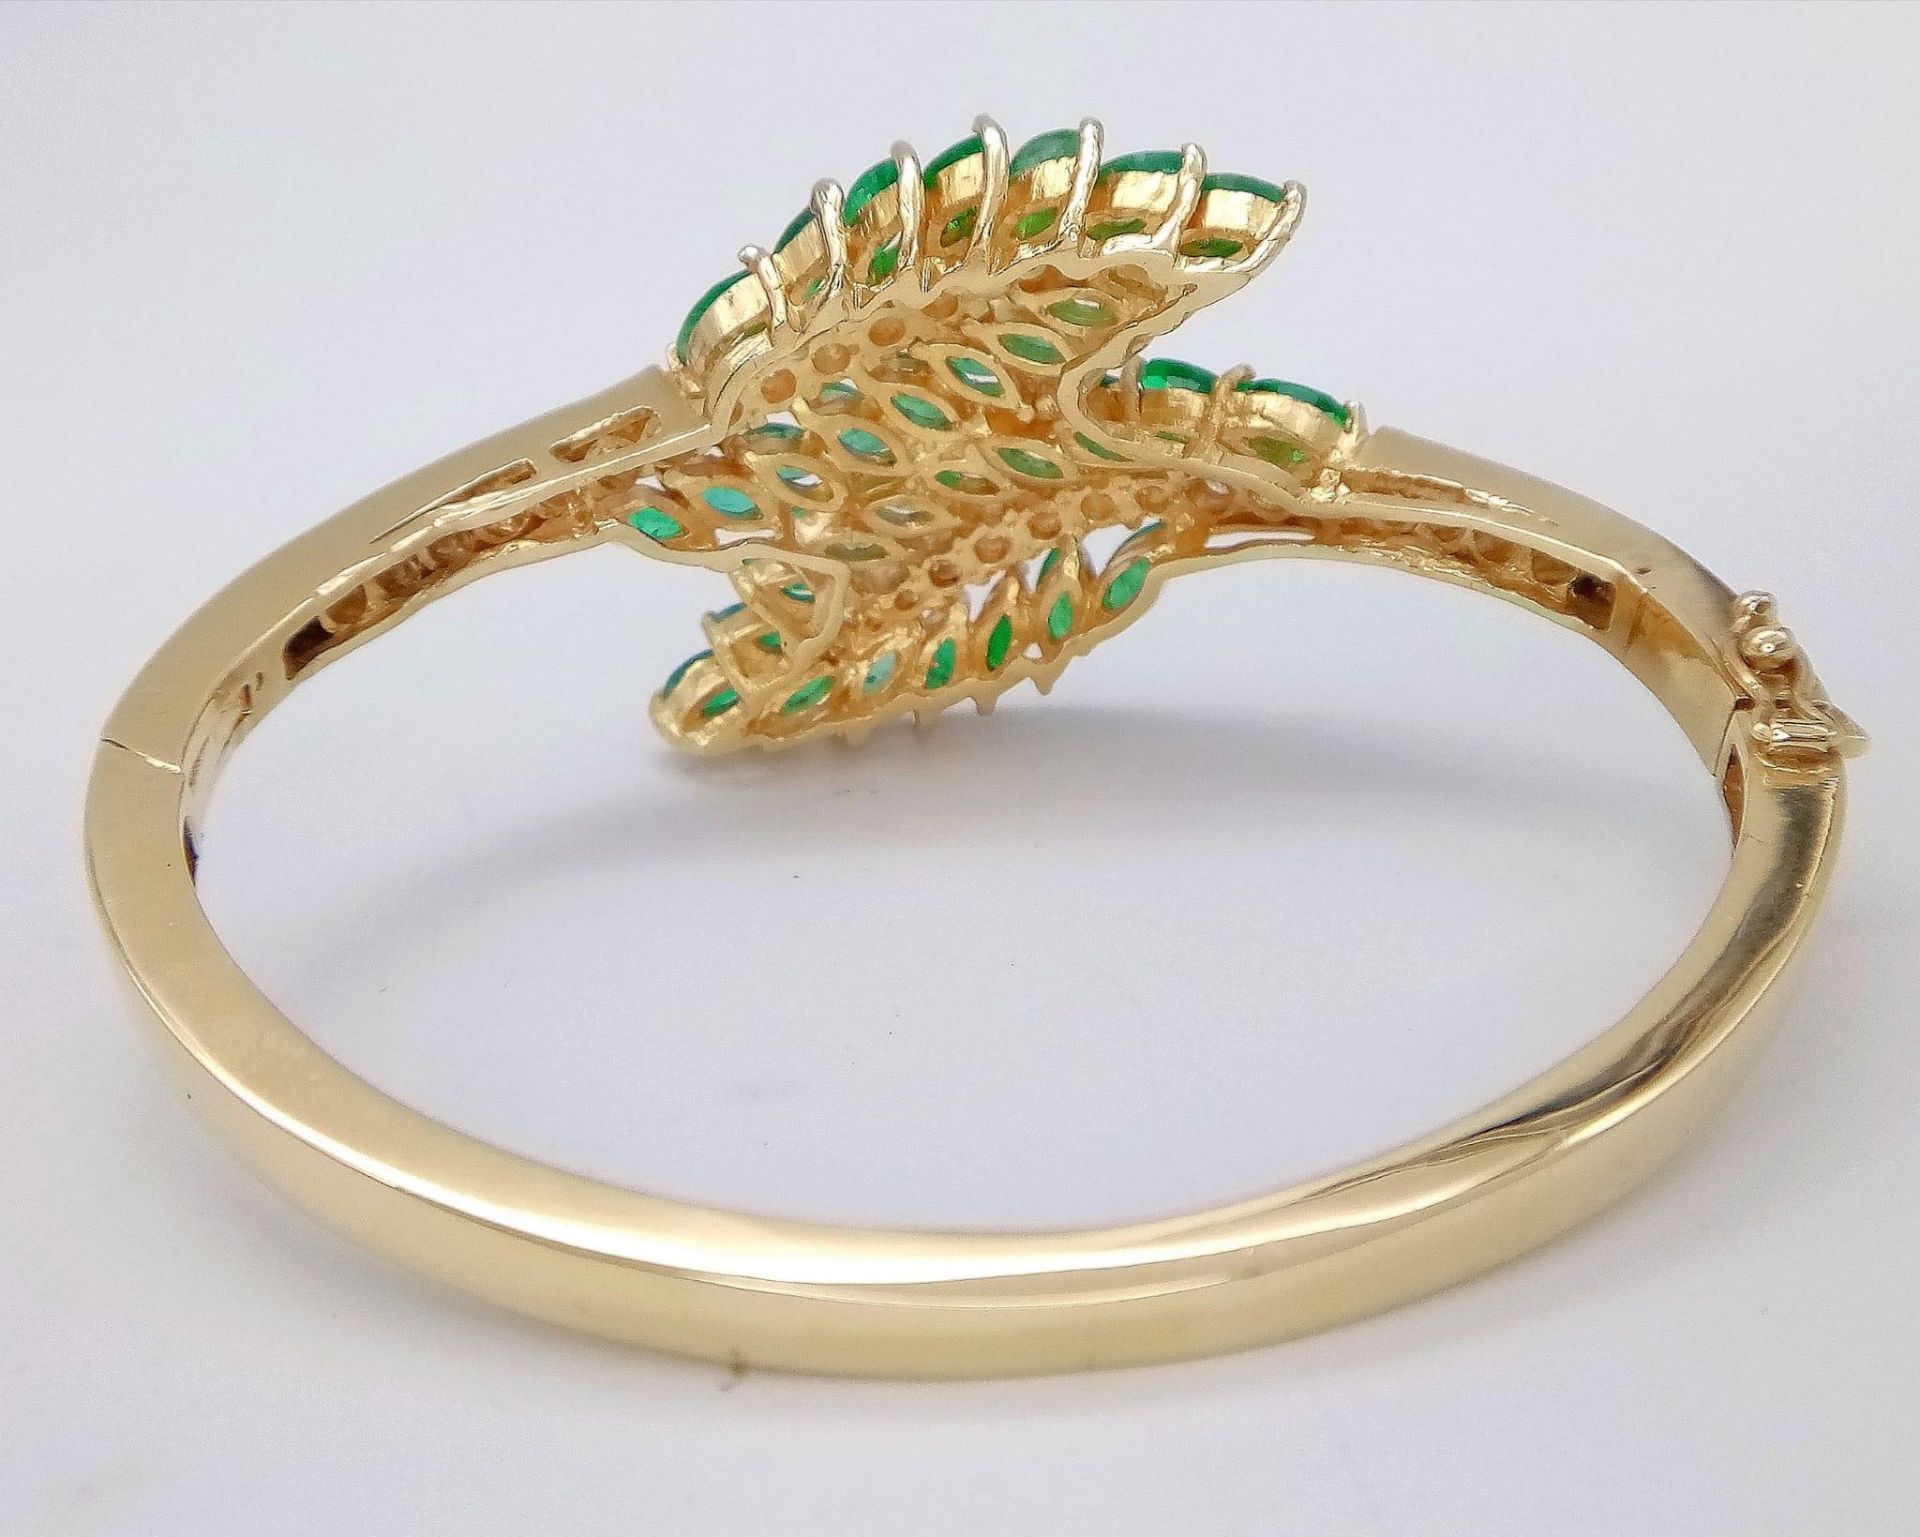 A DIAMOND AND EMERALD LEAF DESIGN BANGLE IN CROSSOVER STYLE SET IN18K GOLD . 33.5gms 10457 - Image 15 of 15